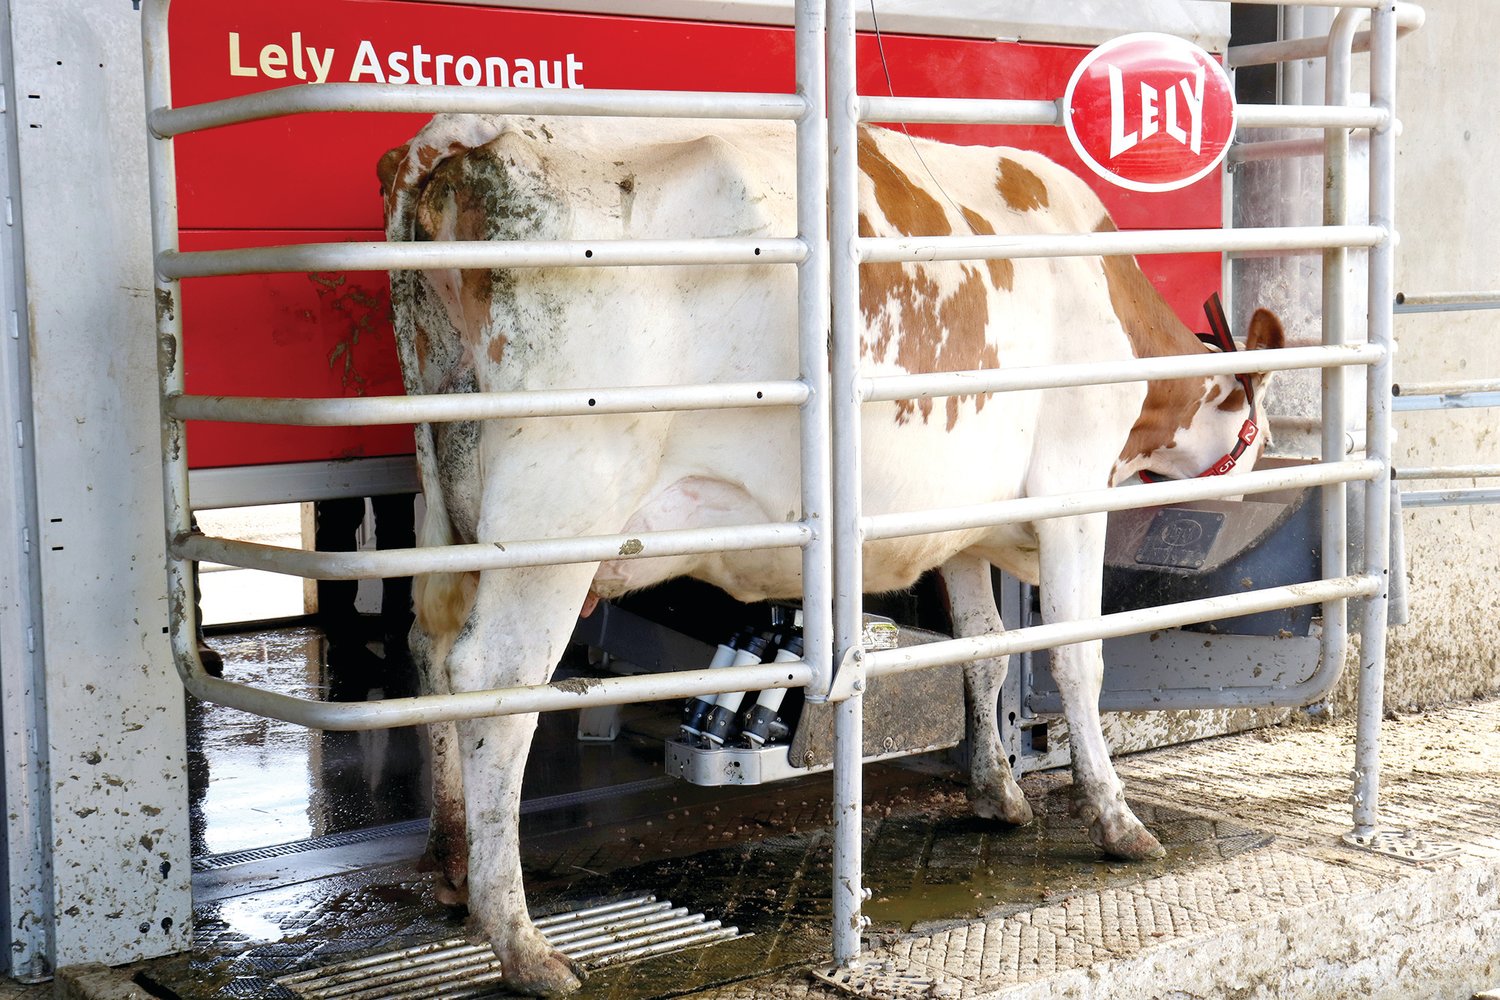 A cow eats grain while being milked by the Lely Astronaut milking robot at Sun-Ton Farms in Adna on Friday.